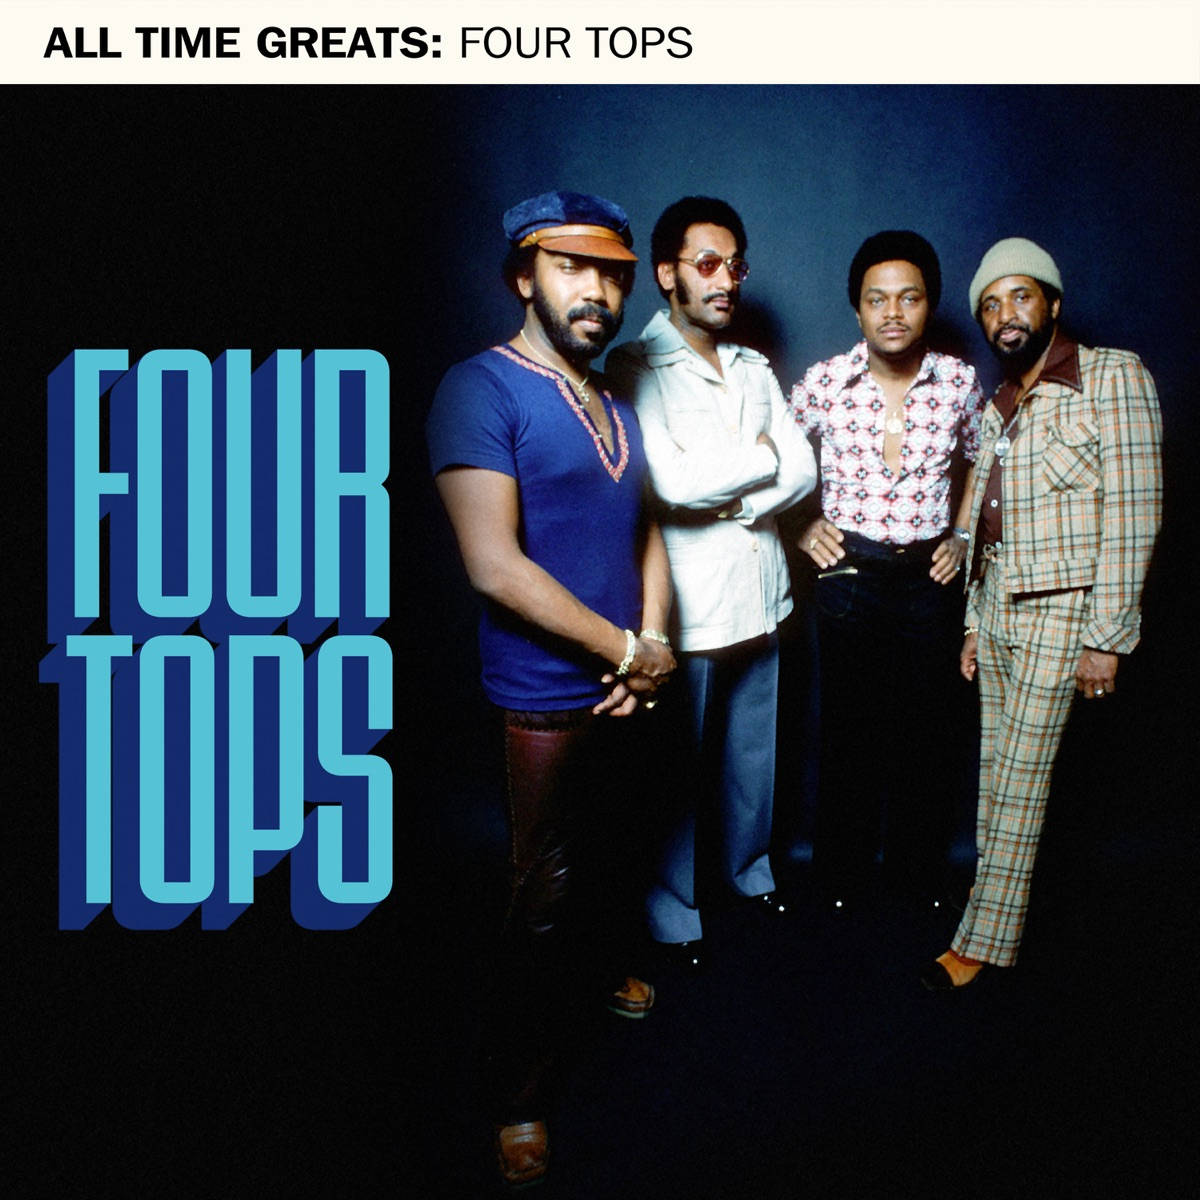 American Vocal Quartet Four Tops All Time Greats Cd Cover Wallpaper